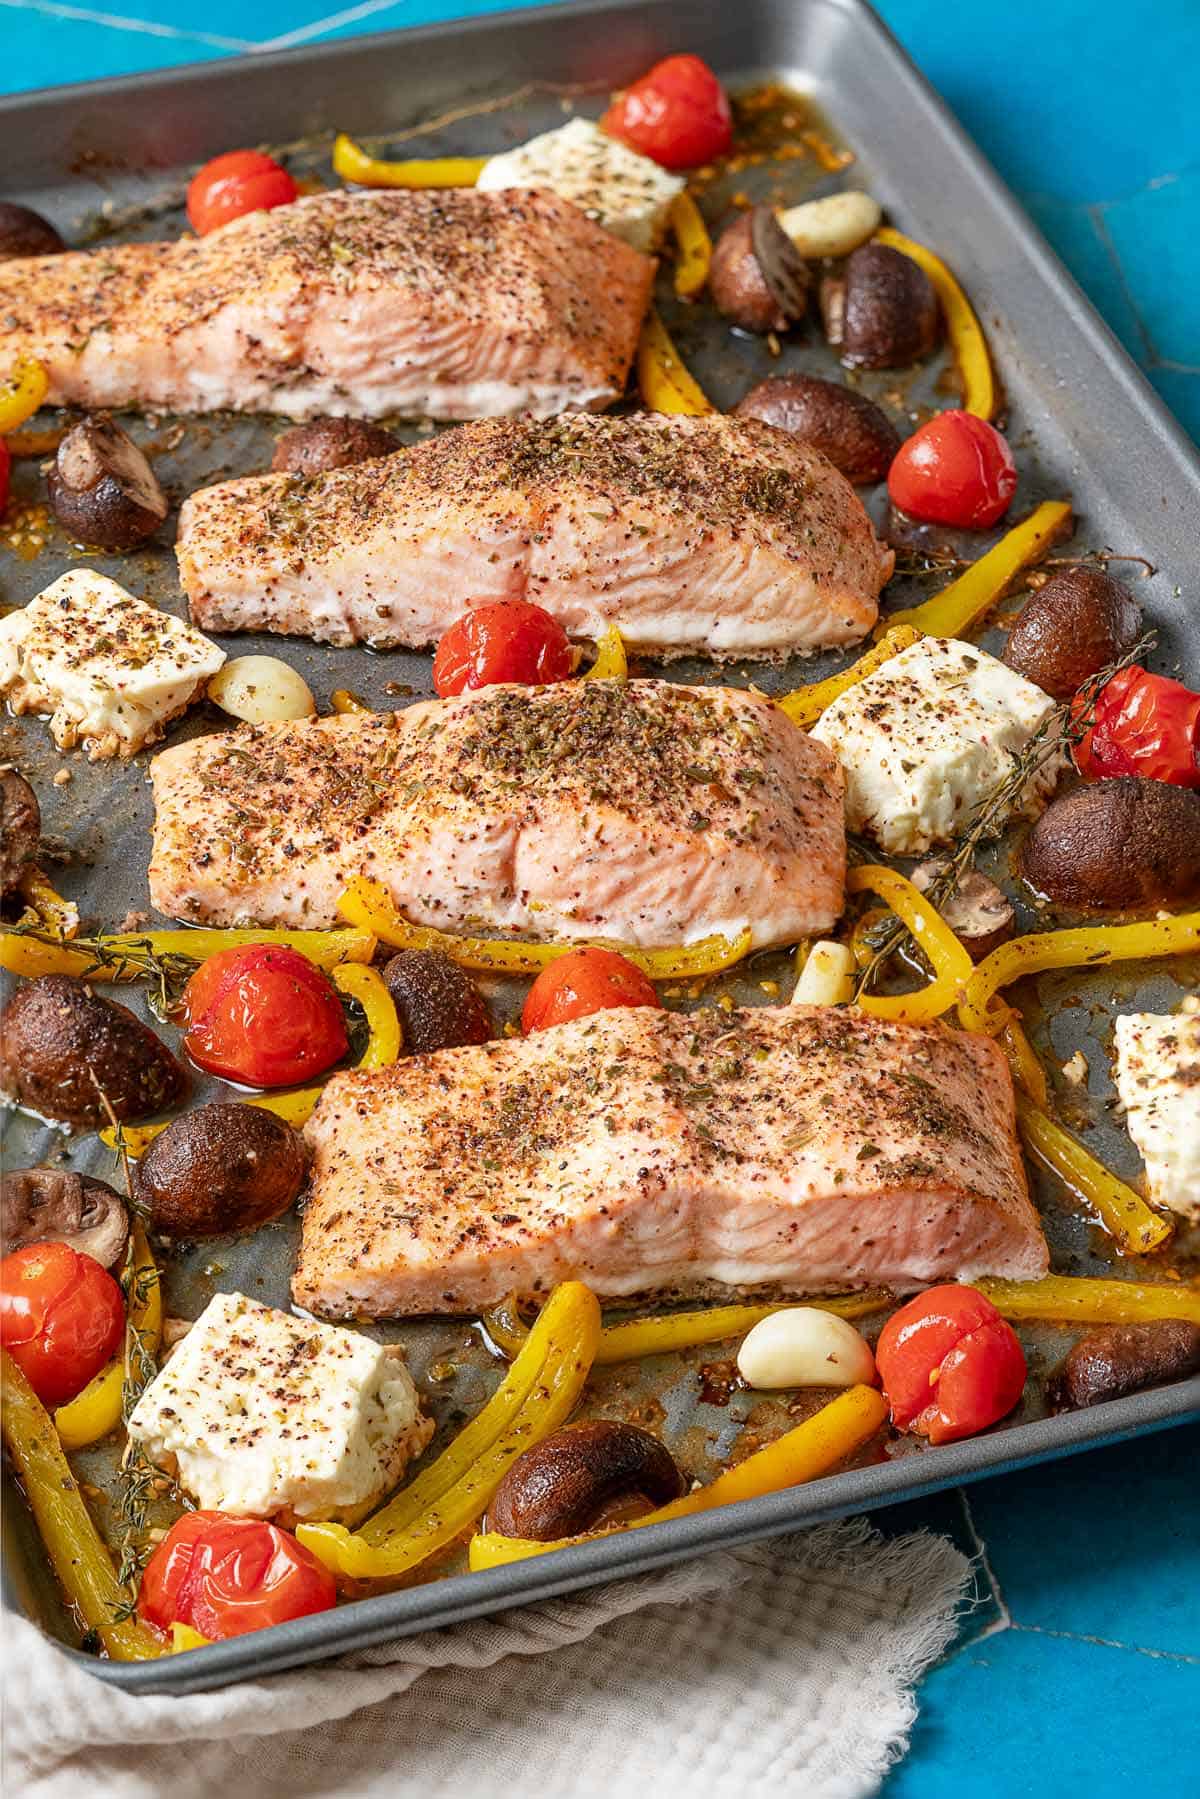 cooke baked salmon fillets with vegetables and feta on a sheet pan sitting on a white linen napkin.